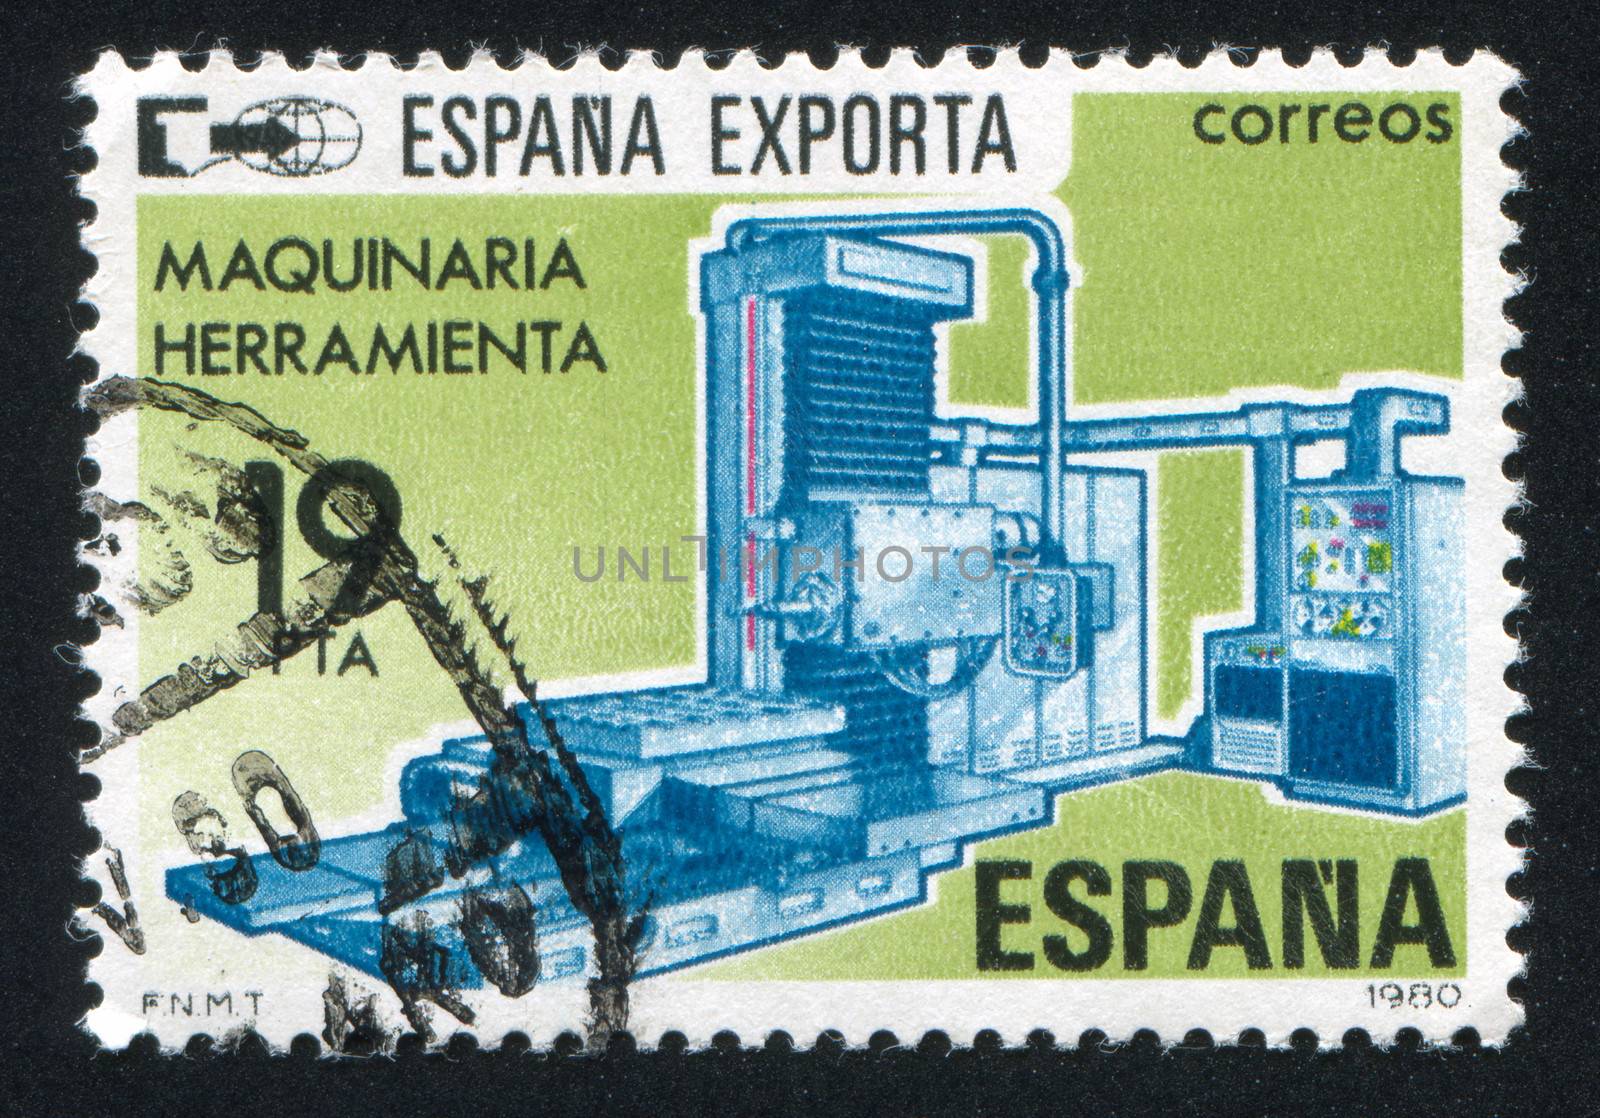 SPAIN - CIRCA 1980: stamp printed by Spain, shows Exports, Machinery, circa 1980